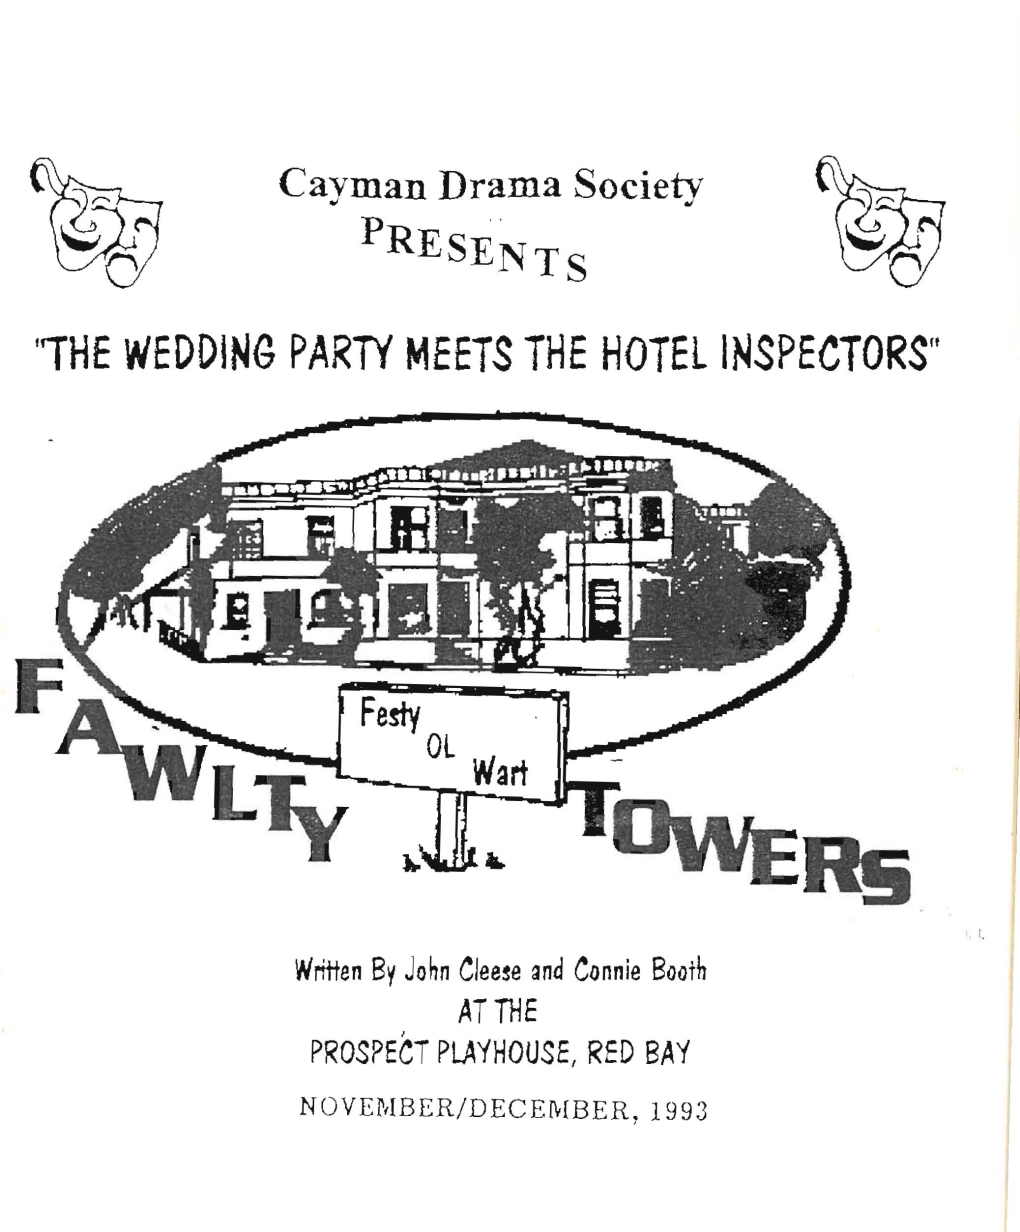 "The Wedding Party Meets the Hotel Inspectors"